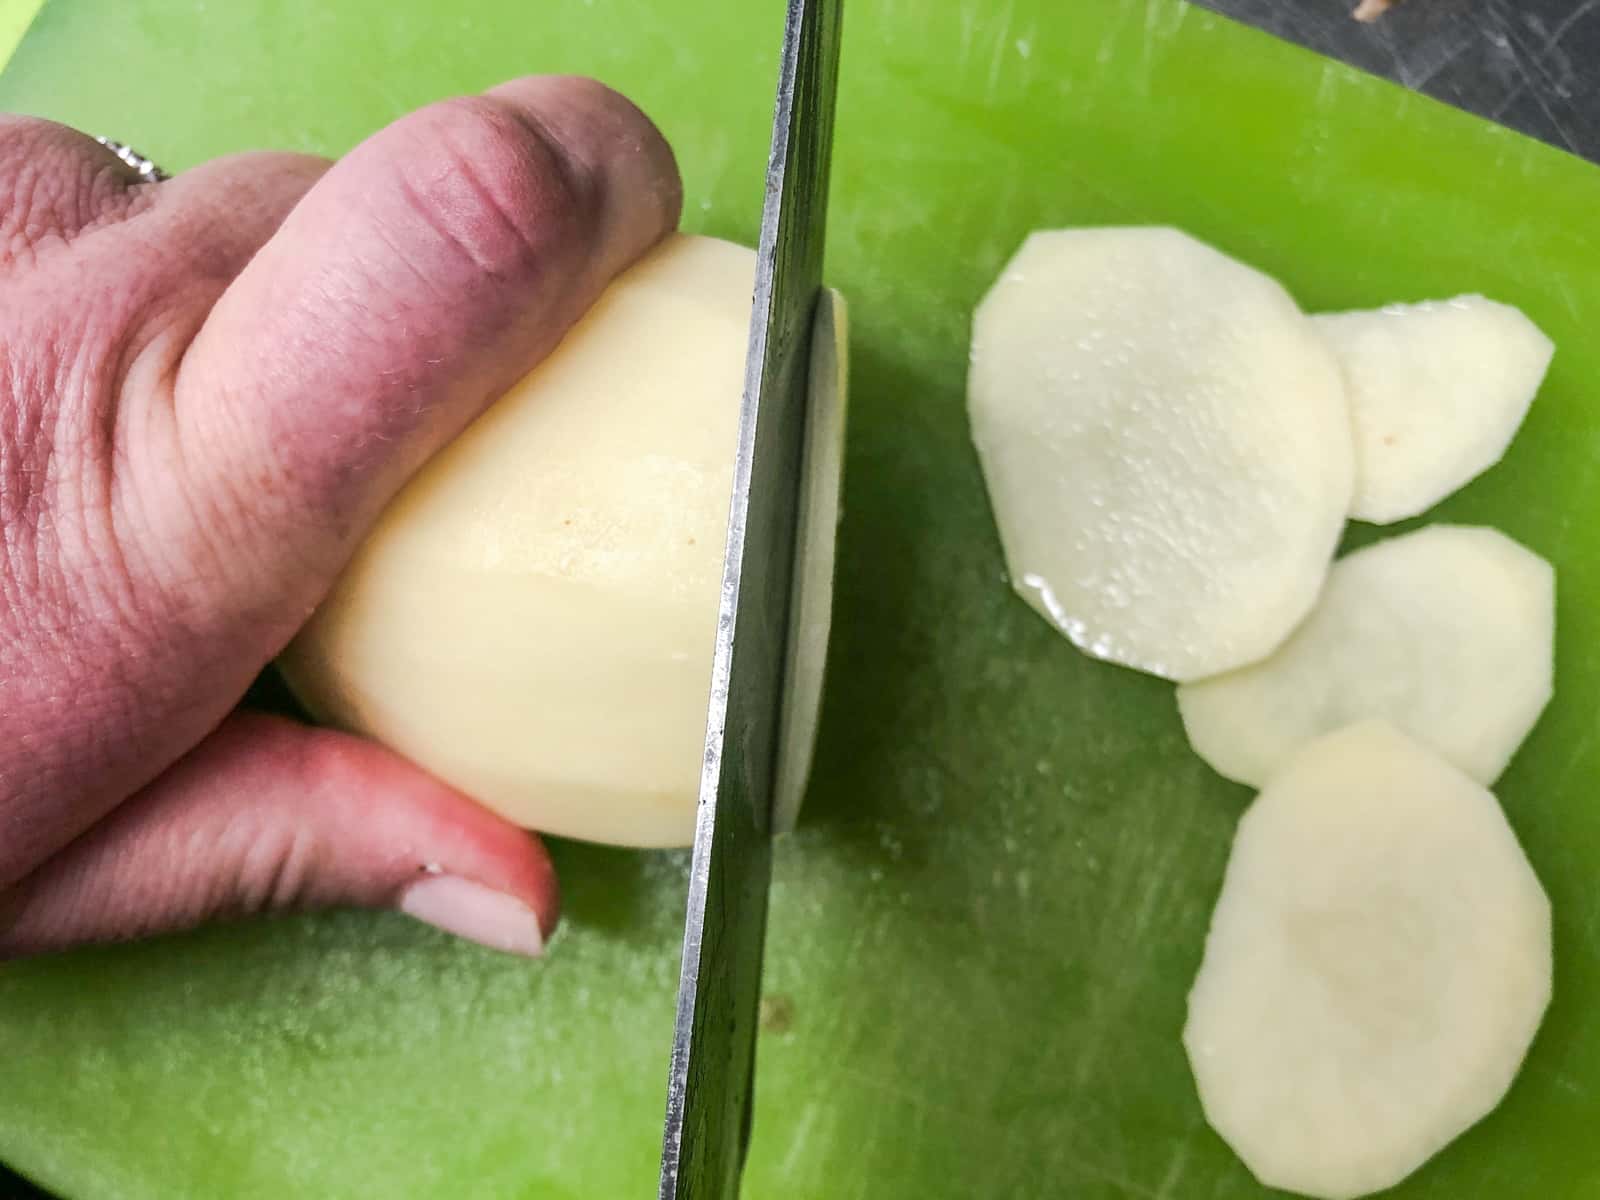 Slicing potatoes for a layered side dish.